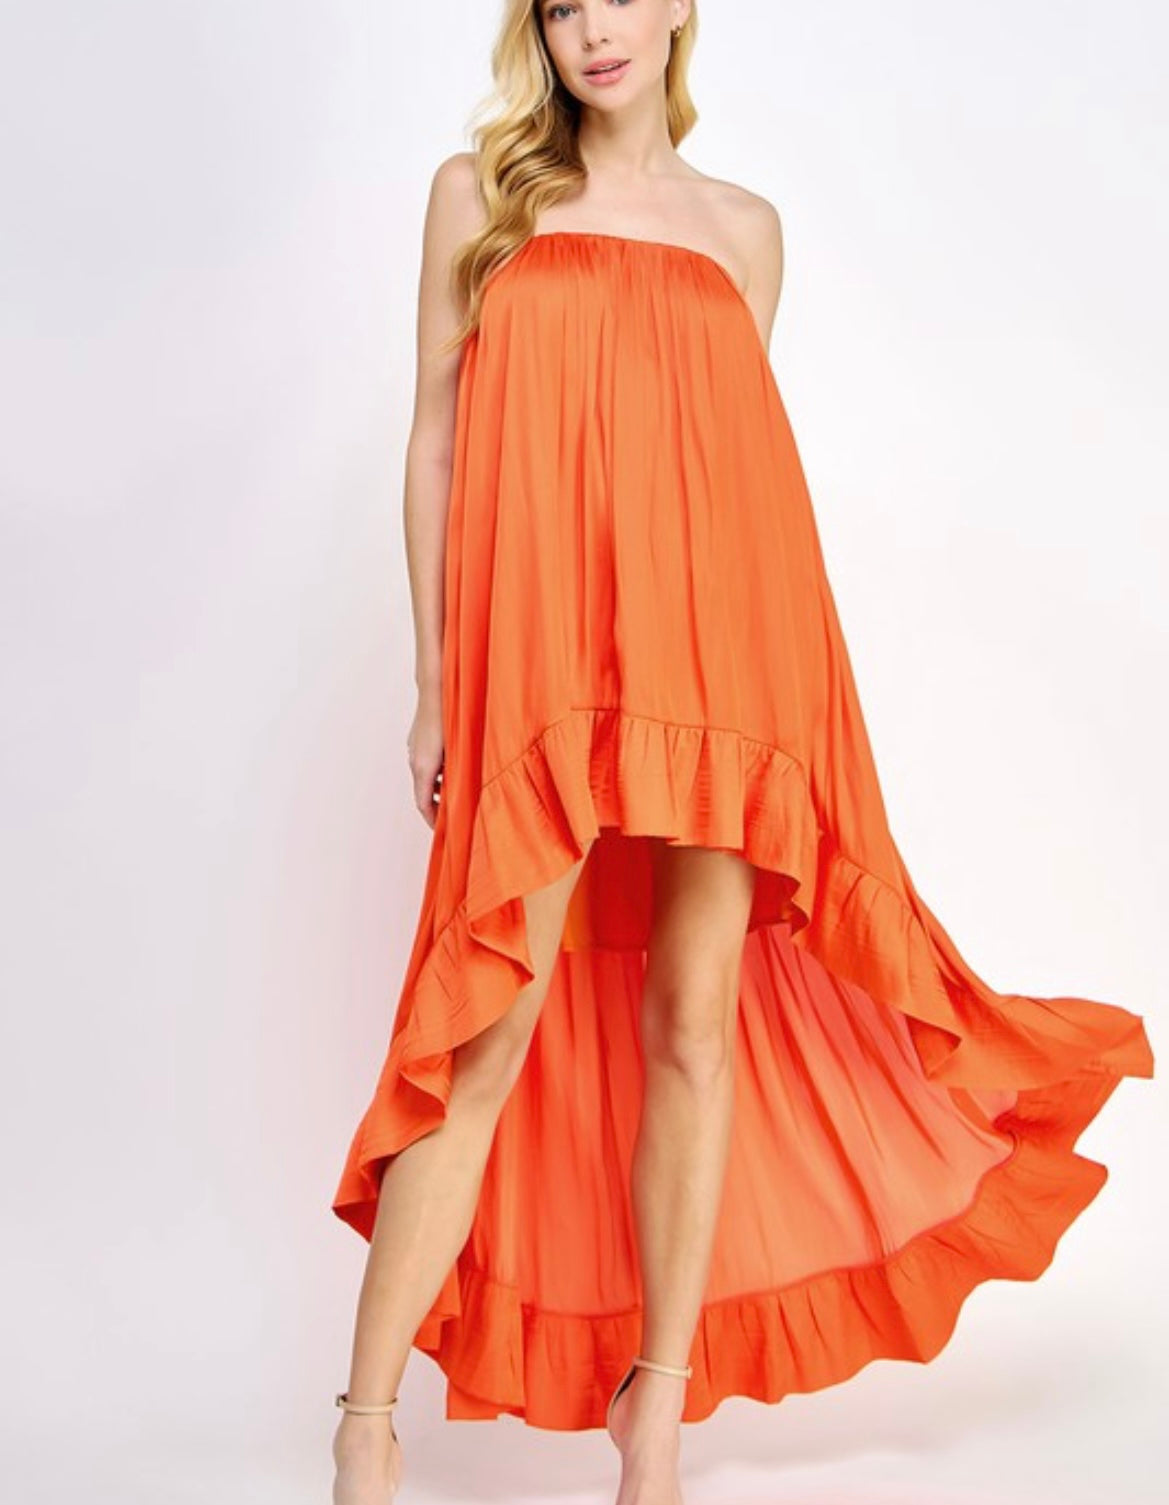 The Neveah Orange High Low Dress